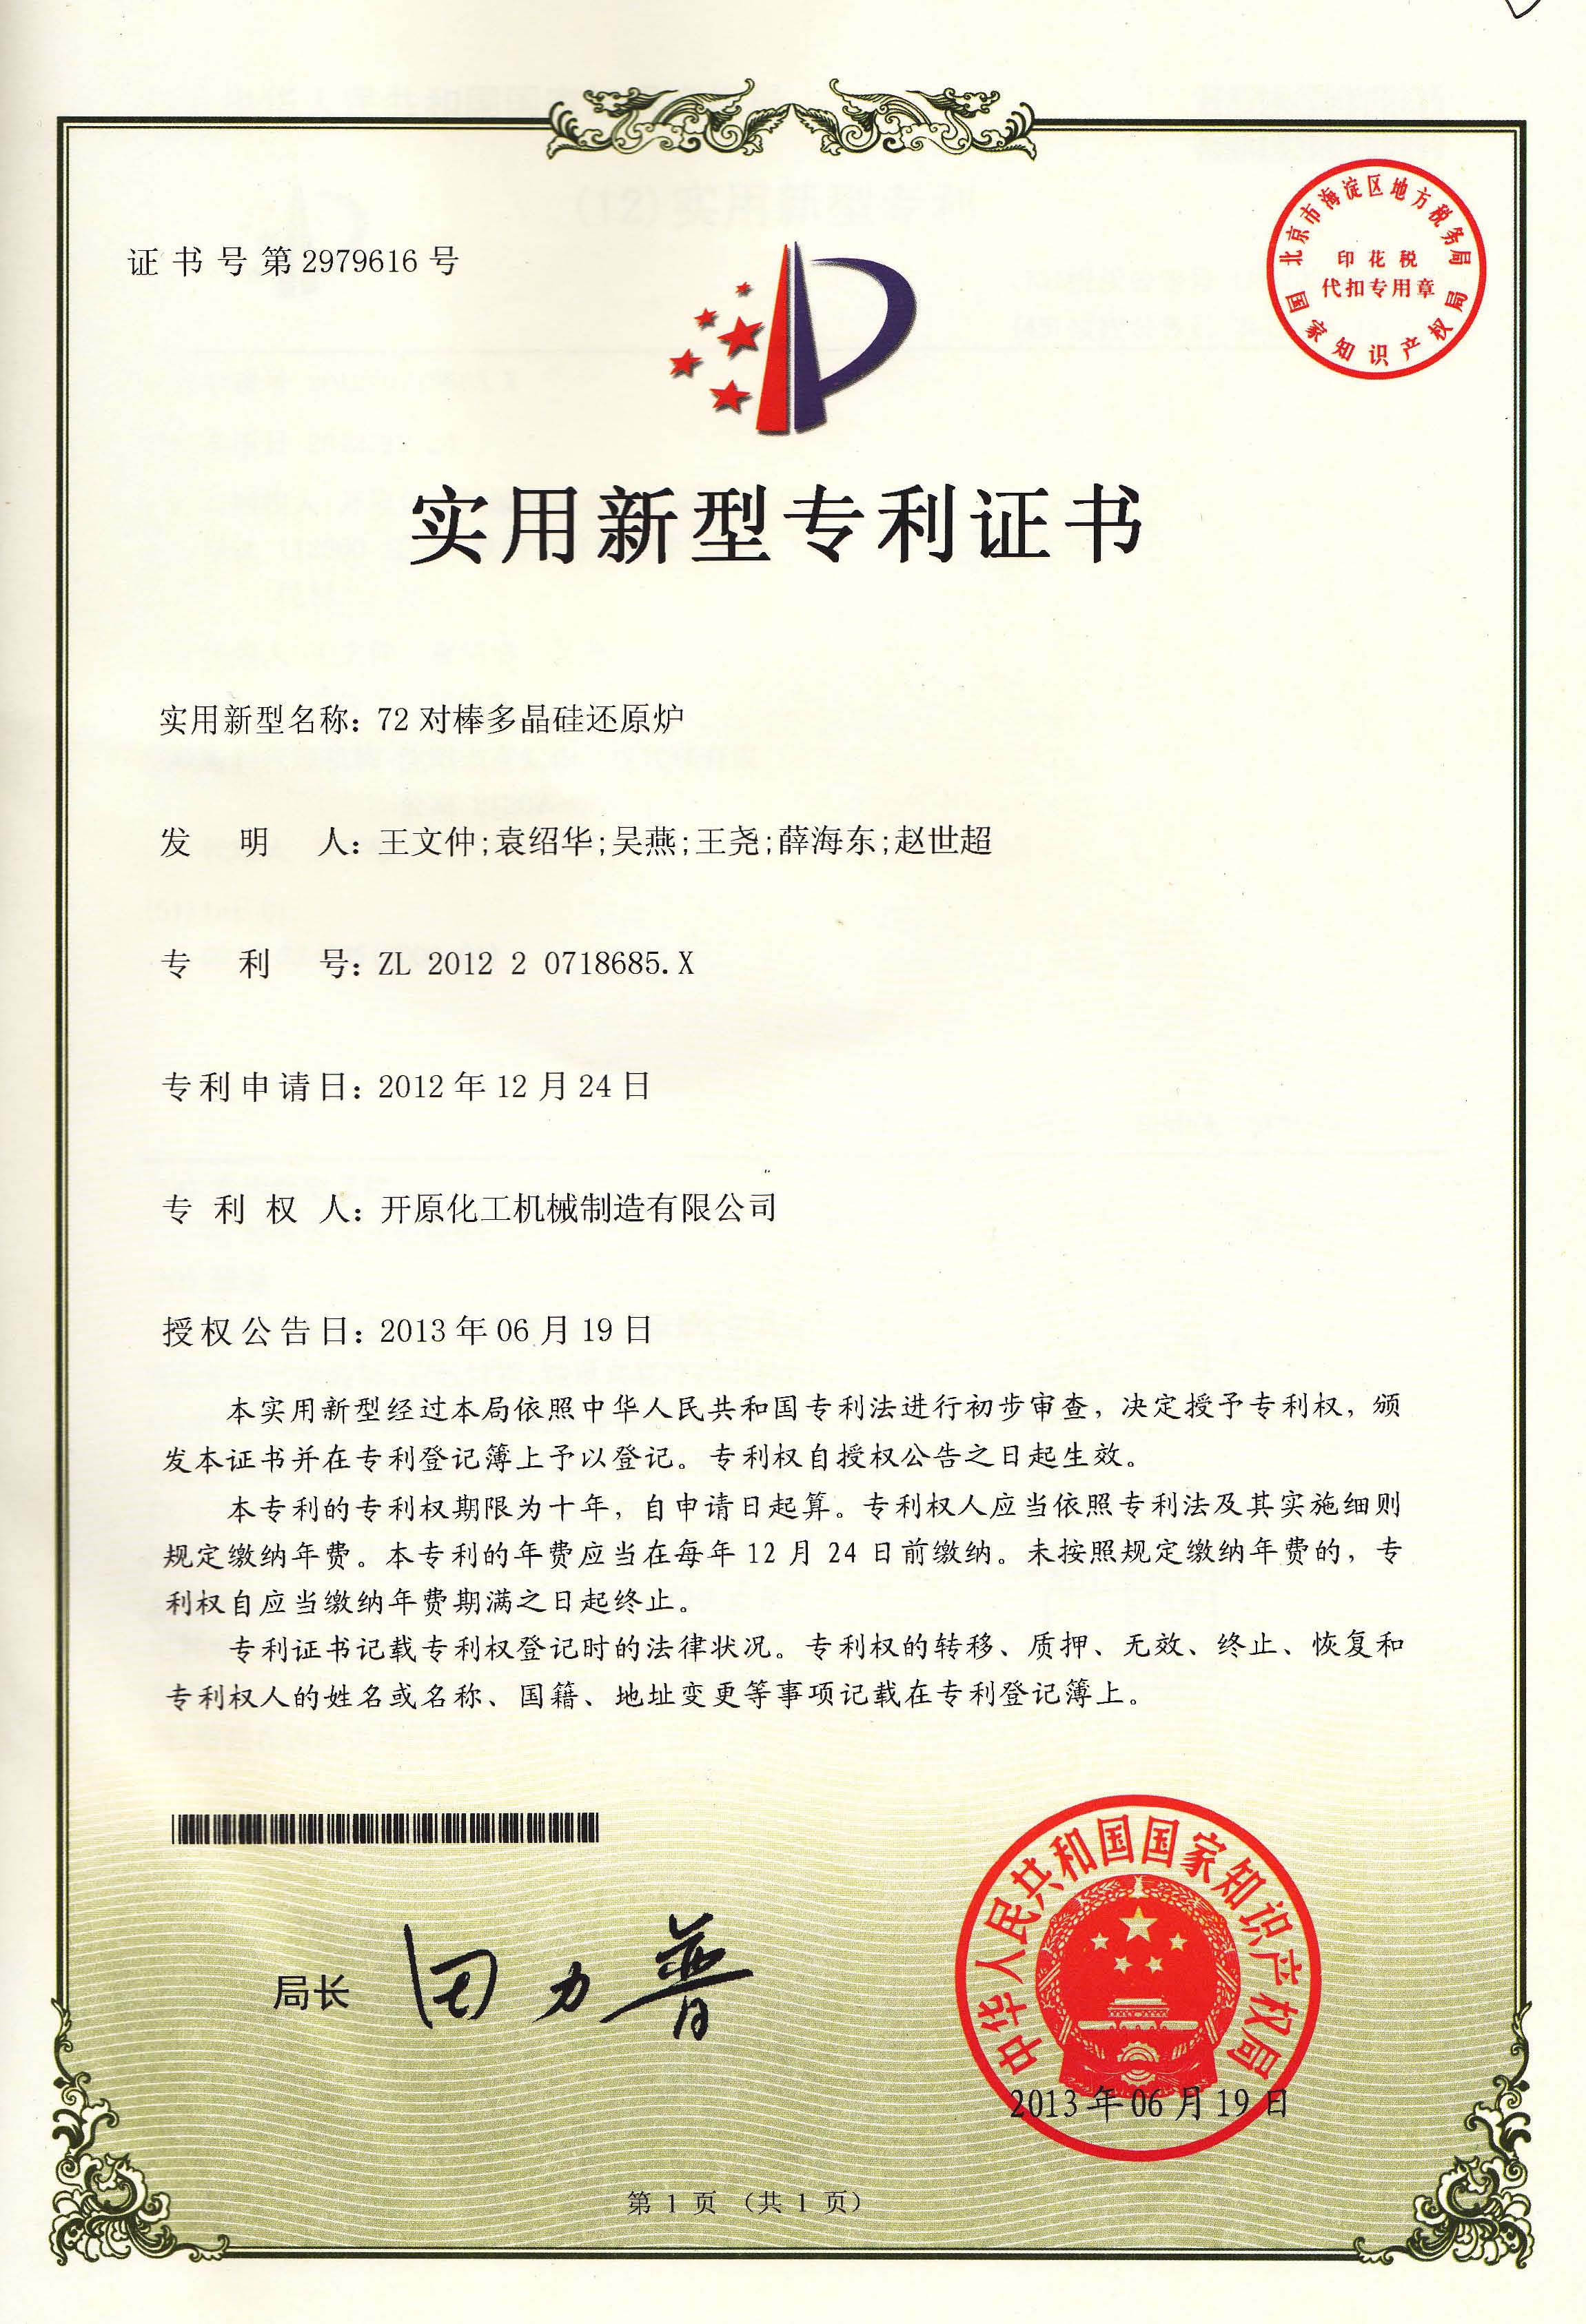 Patent certificate of 72 pairs of rod reduction furnaces